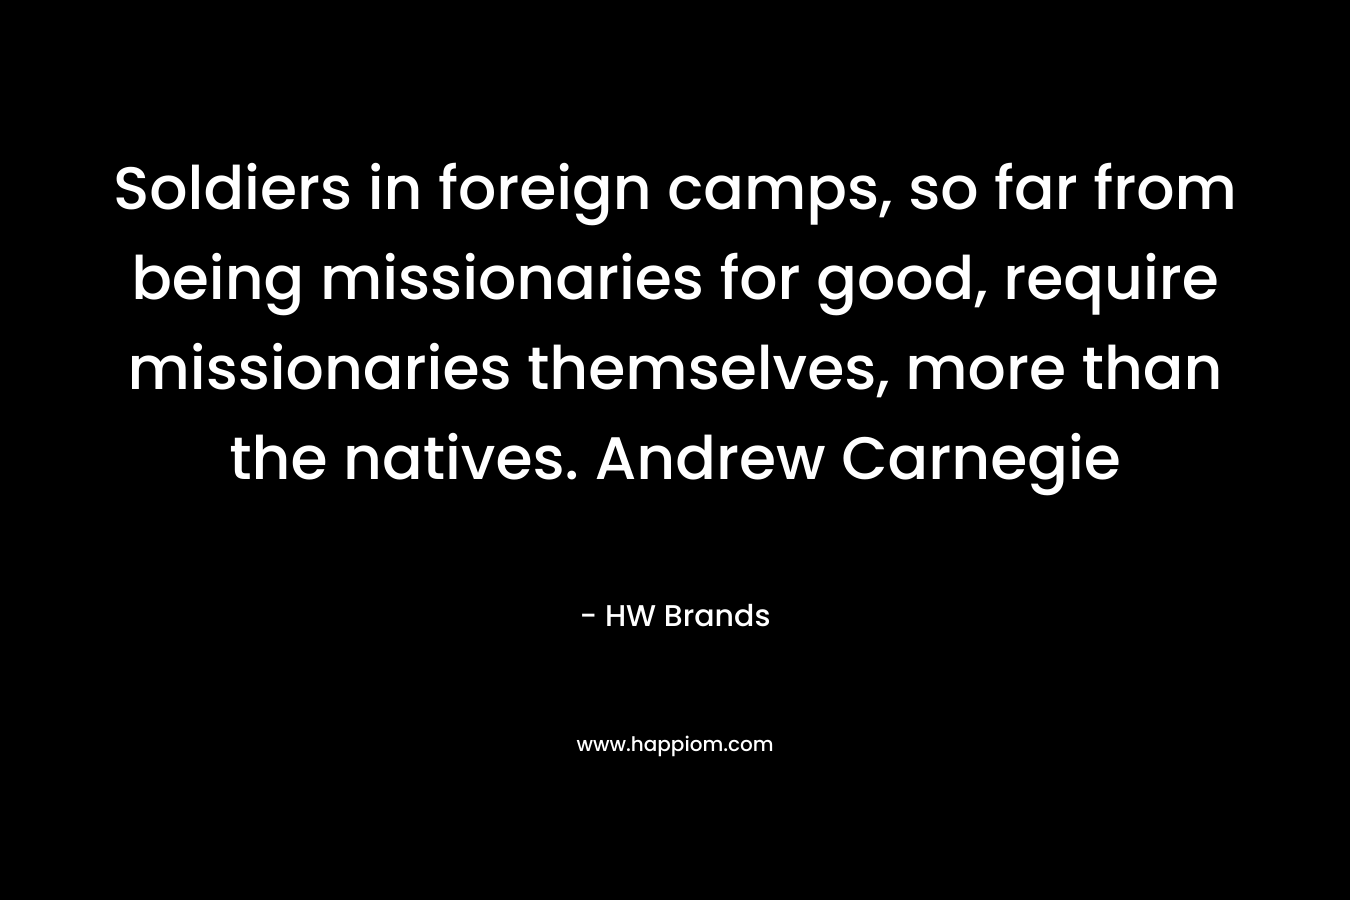 Soldiers in foreign camps, so far from being missionaries for good, require missionaries themselves, more than the natives. Andrew Carnegie